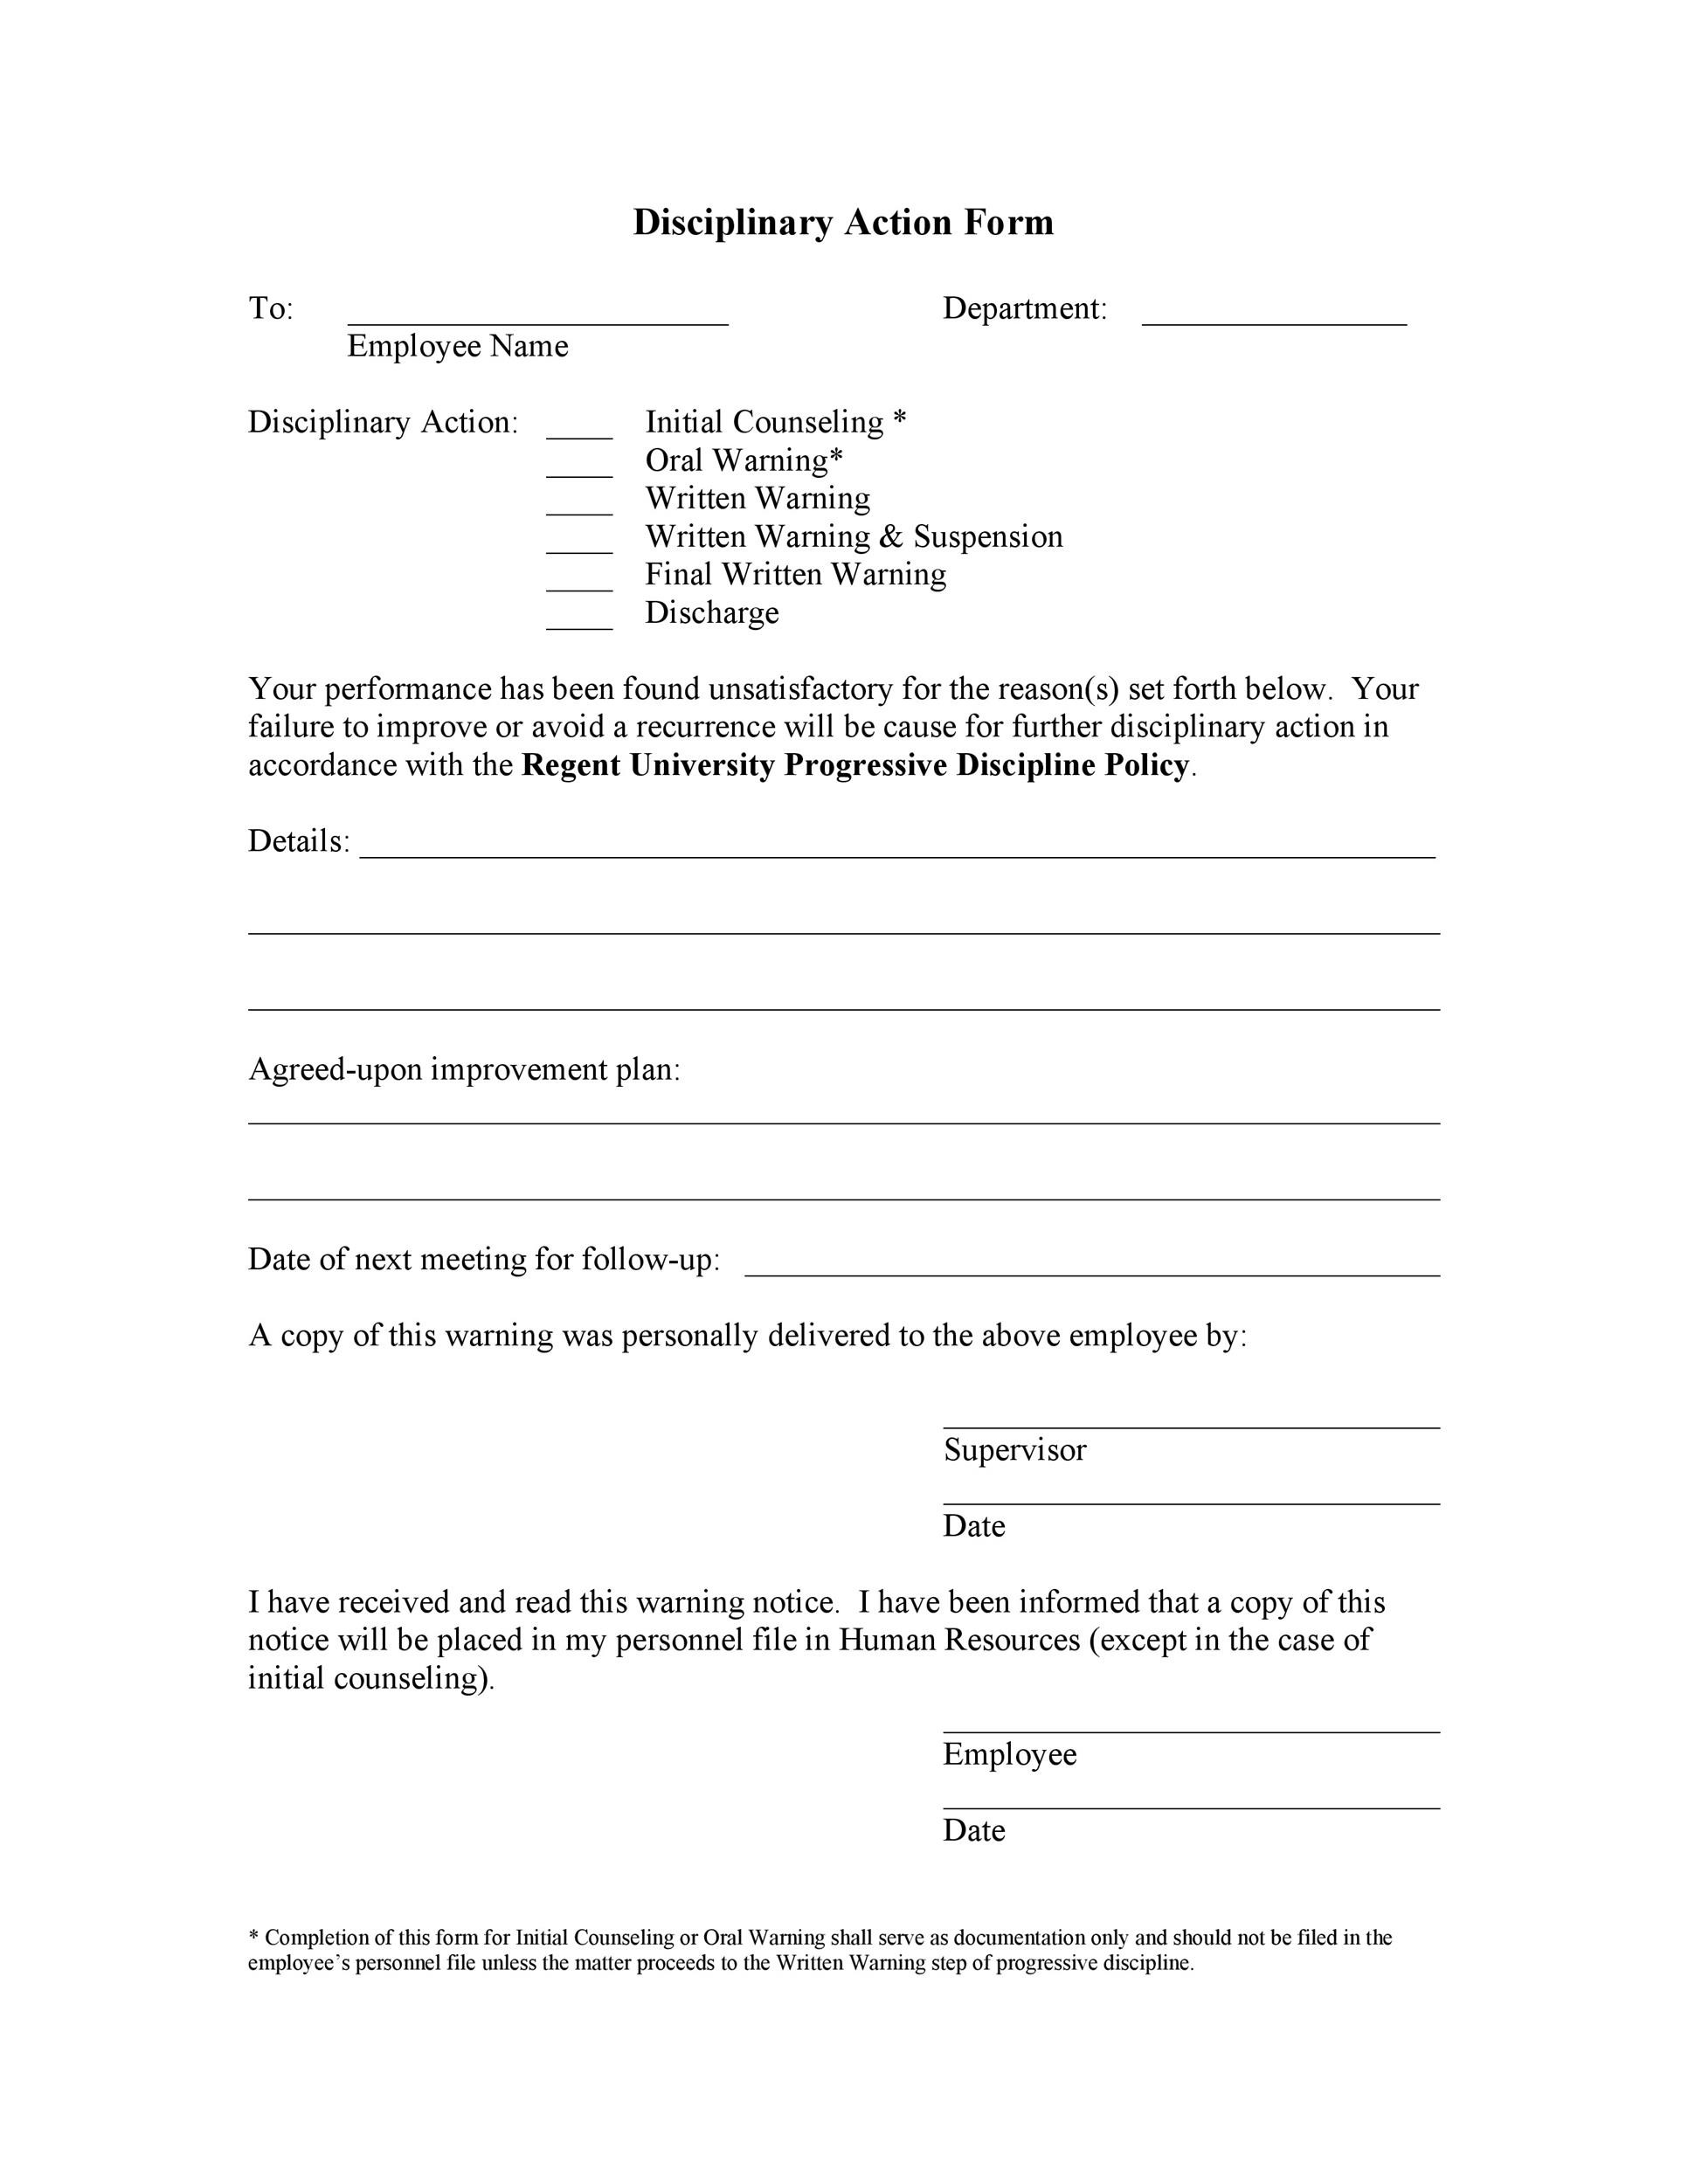 Free Disciplinary Action Form 11